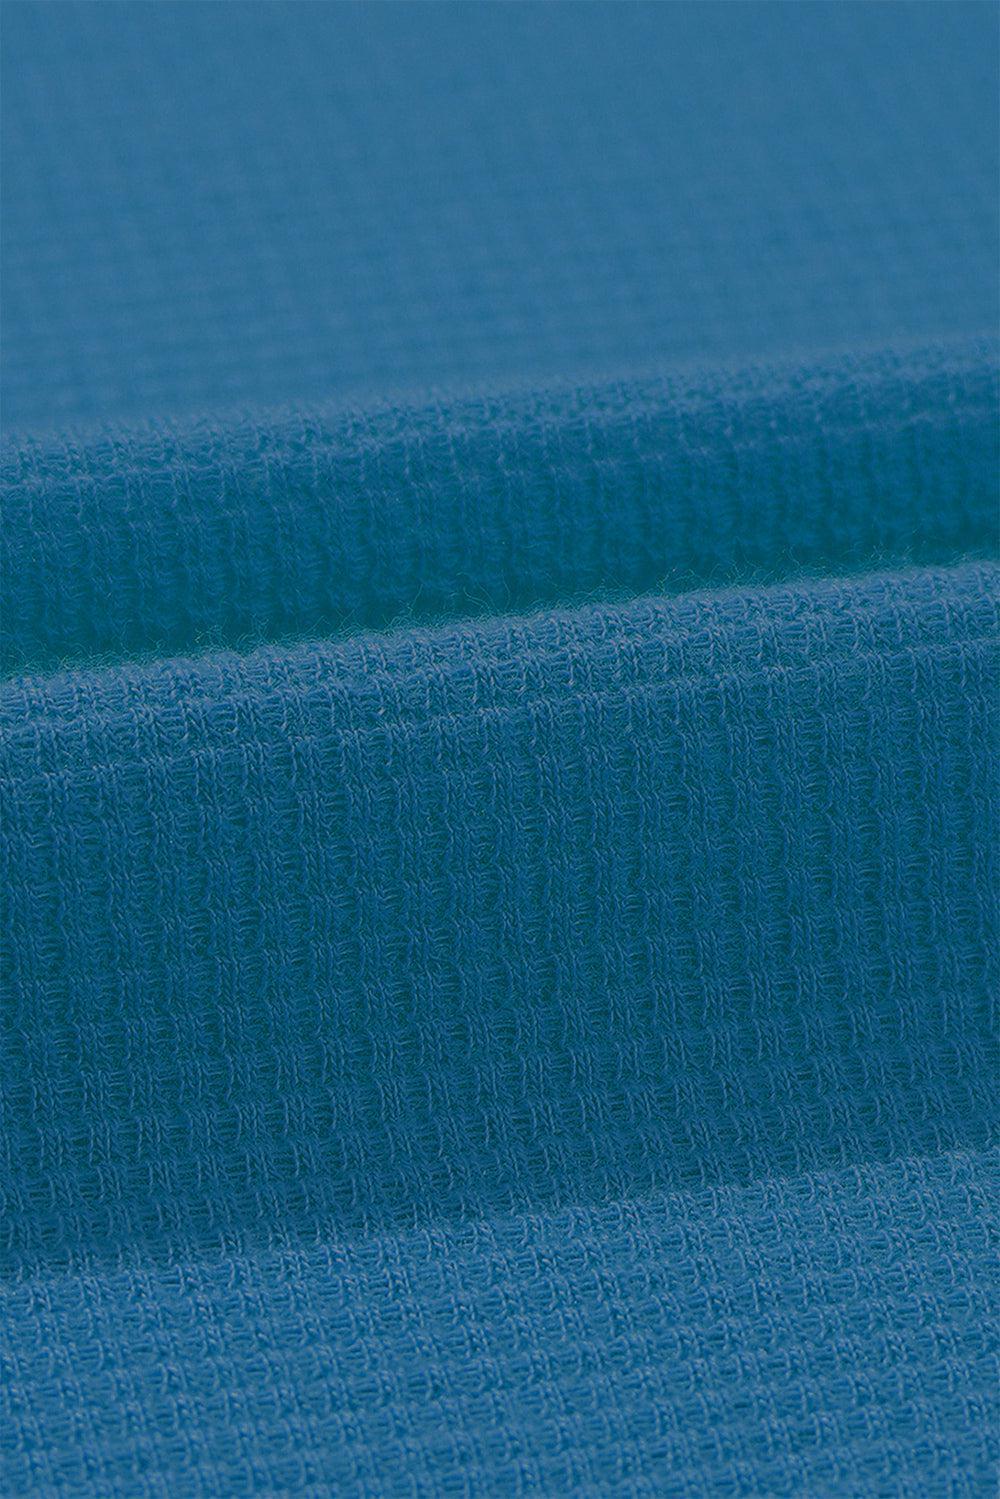 a close up of a blue fabric